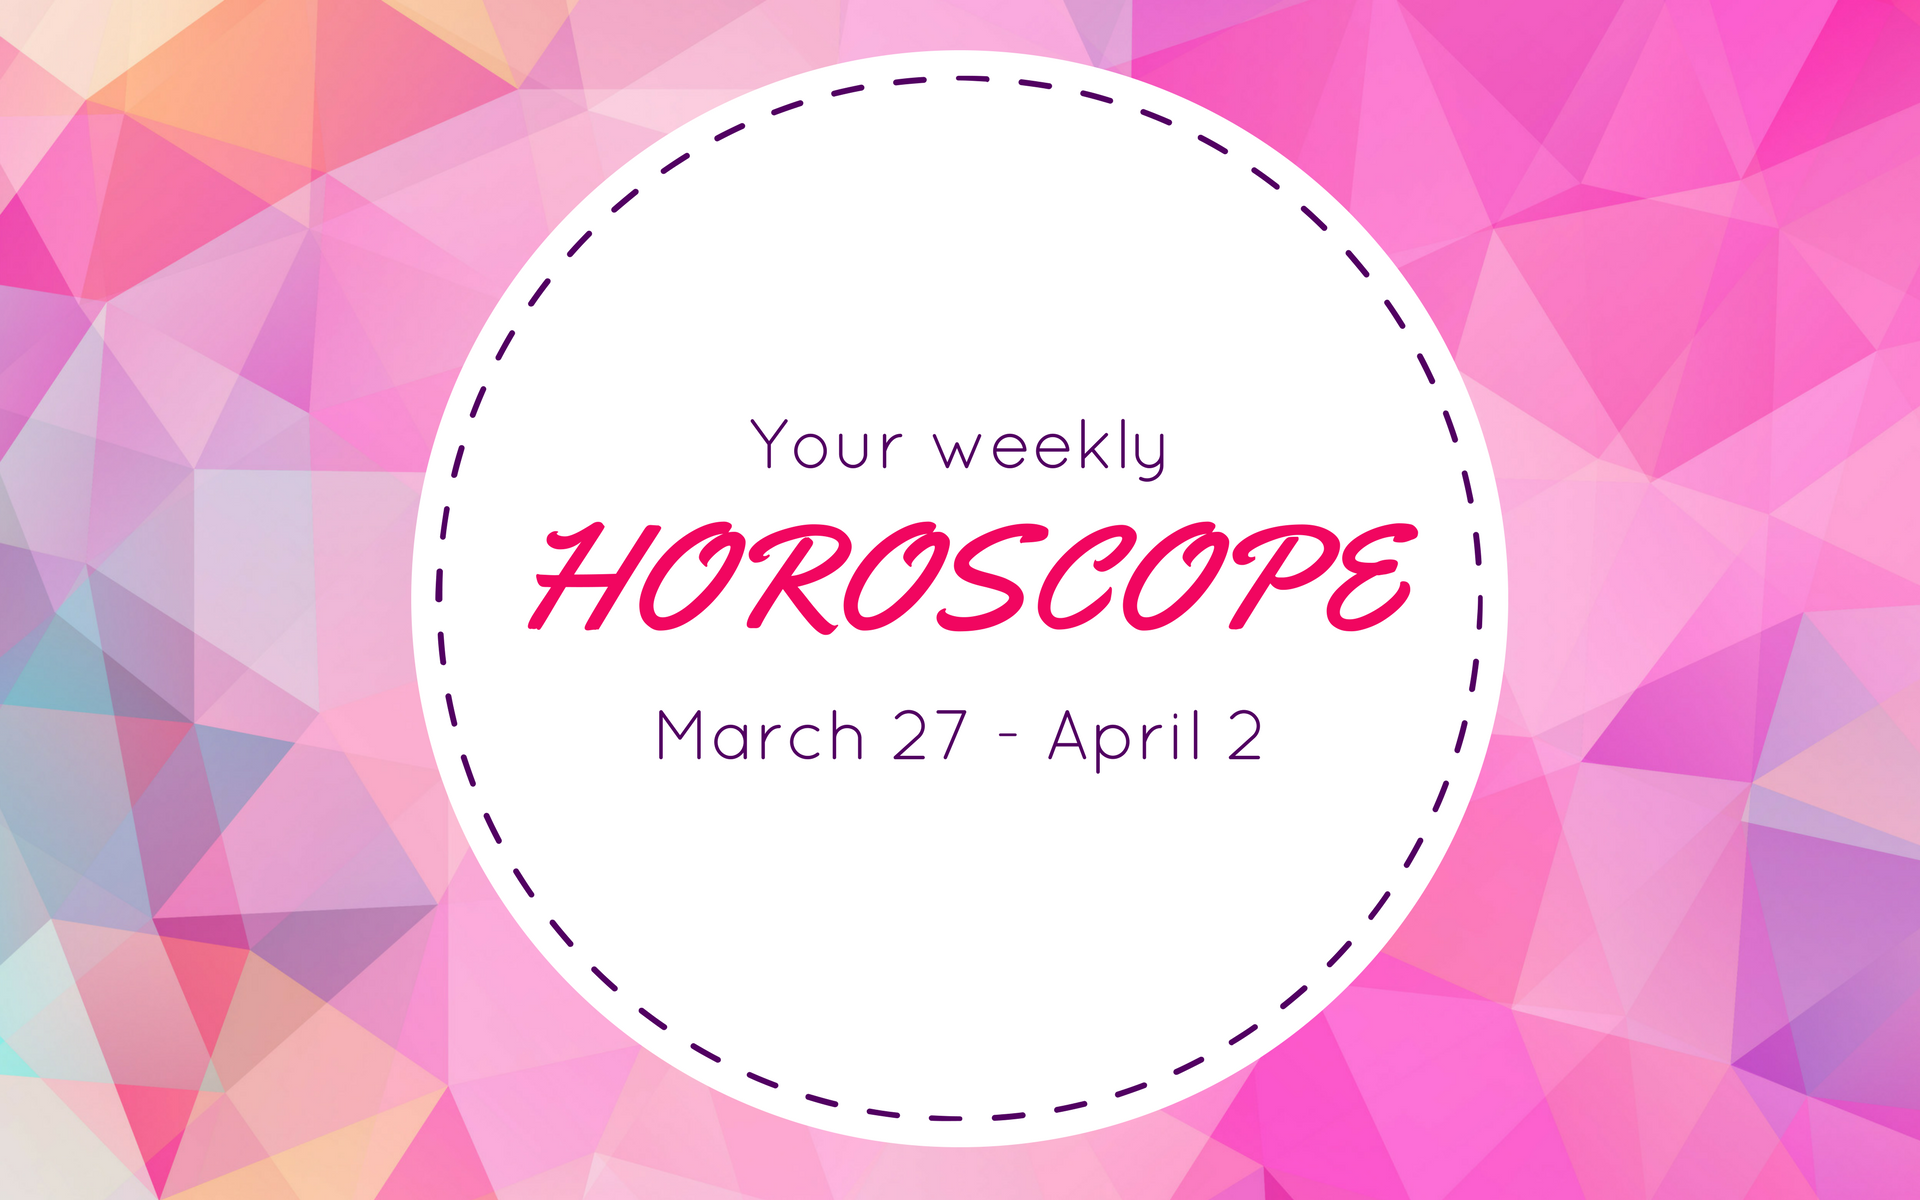 Your Weekly Horoscope: March 27 - April 2